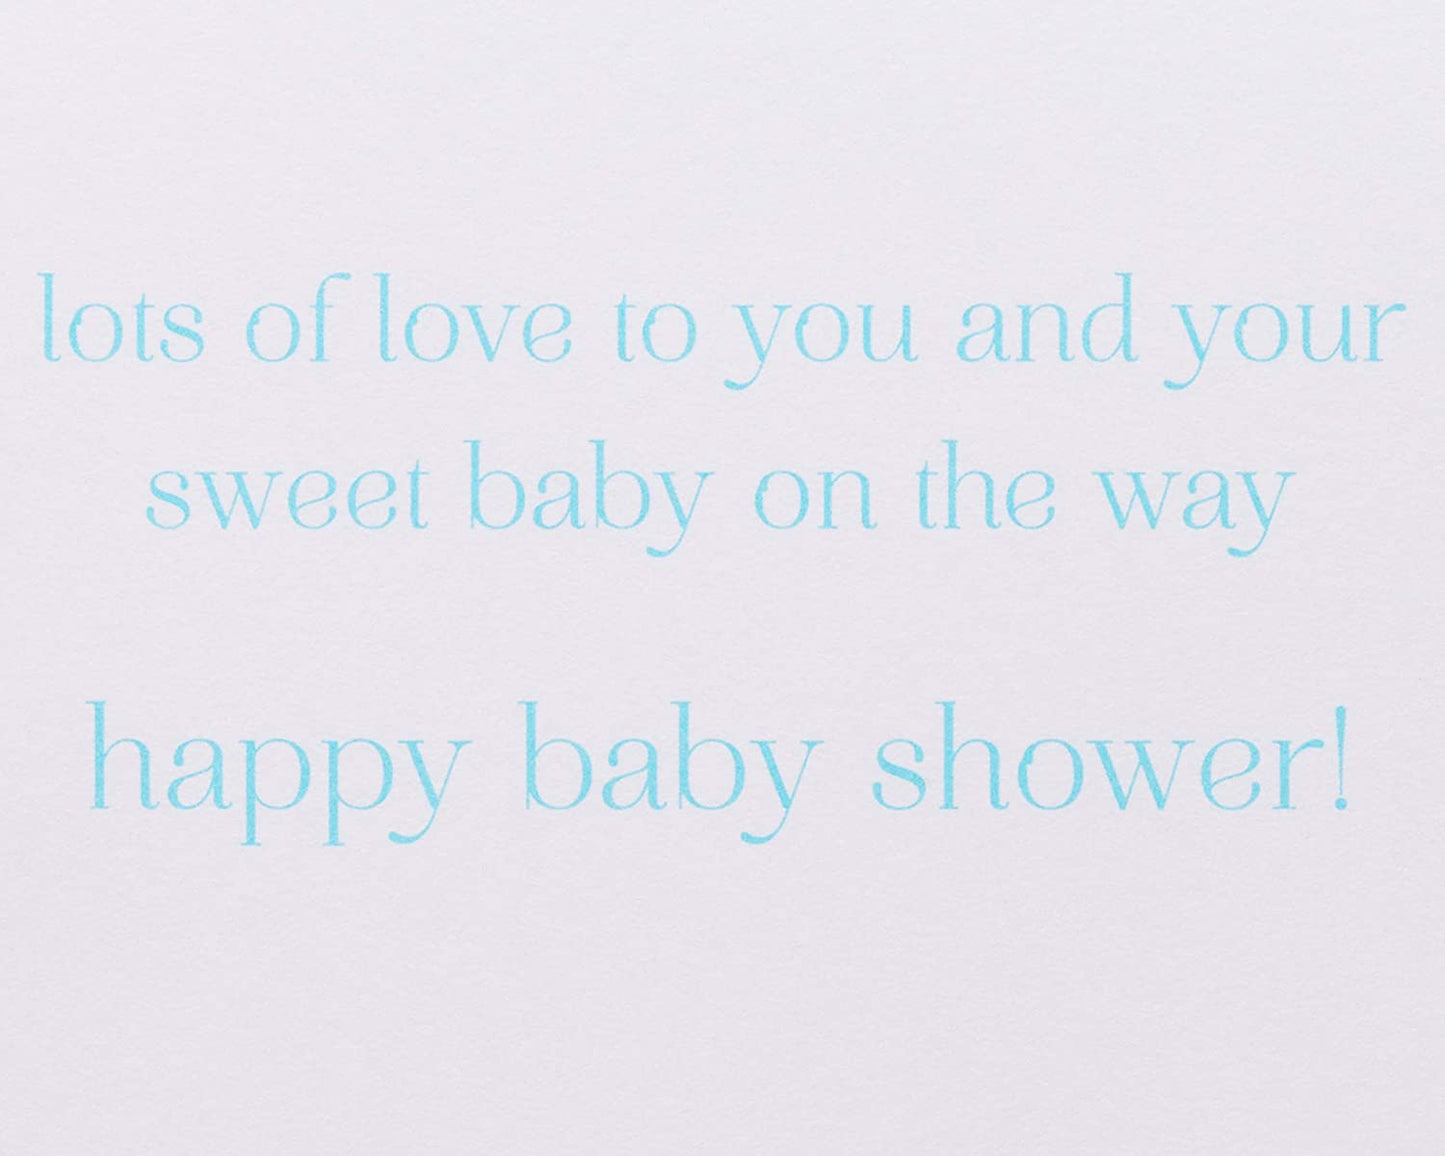 Papyrus Baby Shower Card (Sweet Baby)